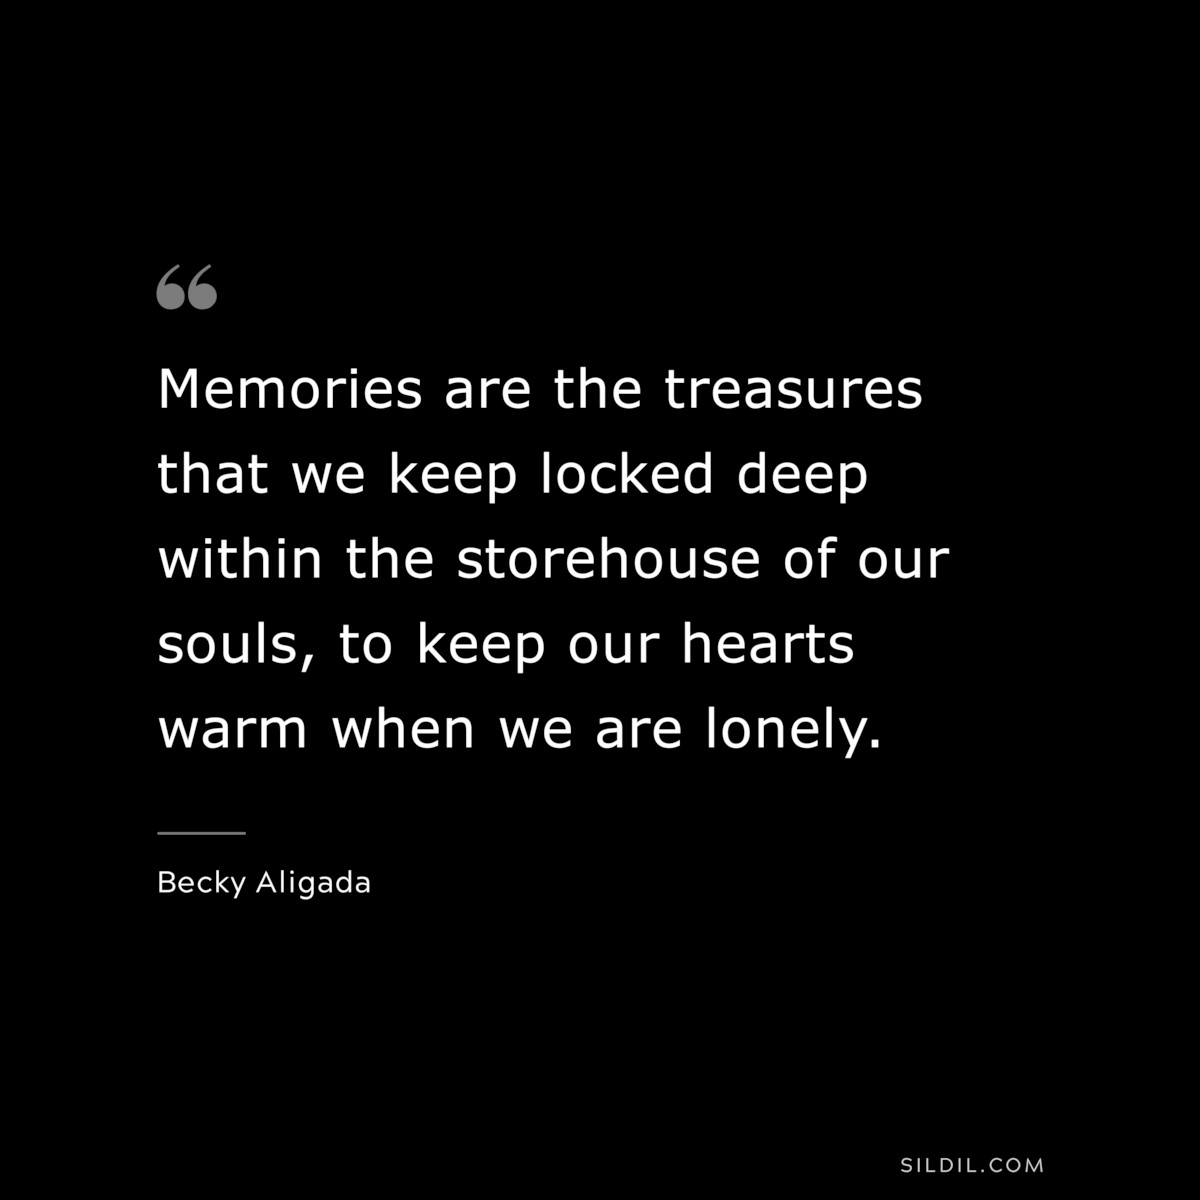 Memories are the treasures that we keep locked deep within the storehouse of our souls, to keep our hearts warm when we are lonely. ― Becky Aligada